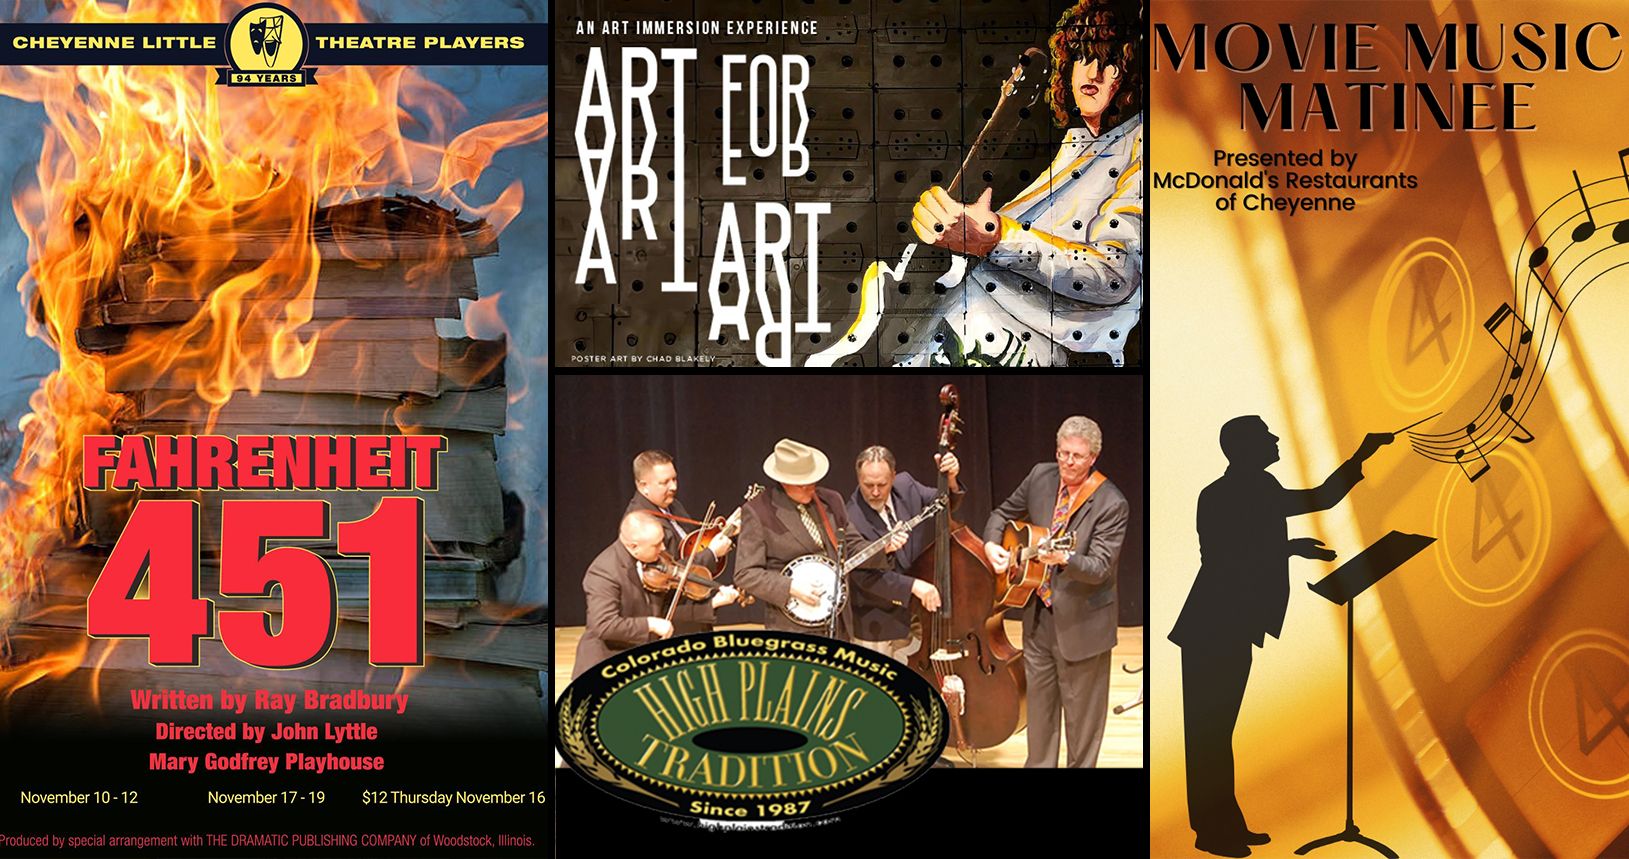 Art for Art, Dueling Pianos, Bluegrass, Holiday Tea and So Much More Happening This Weekend!